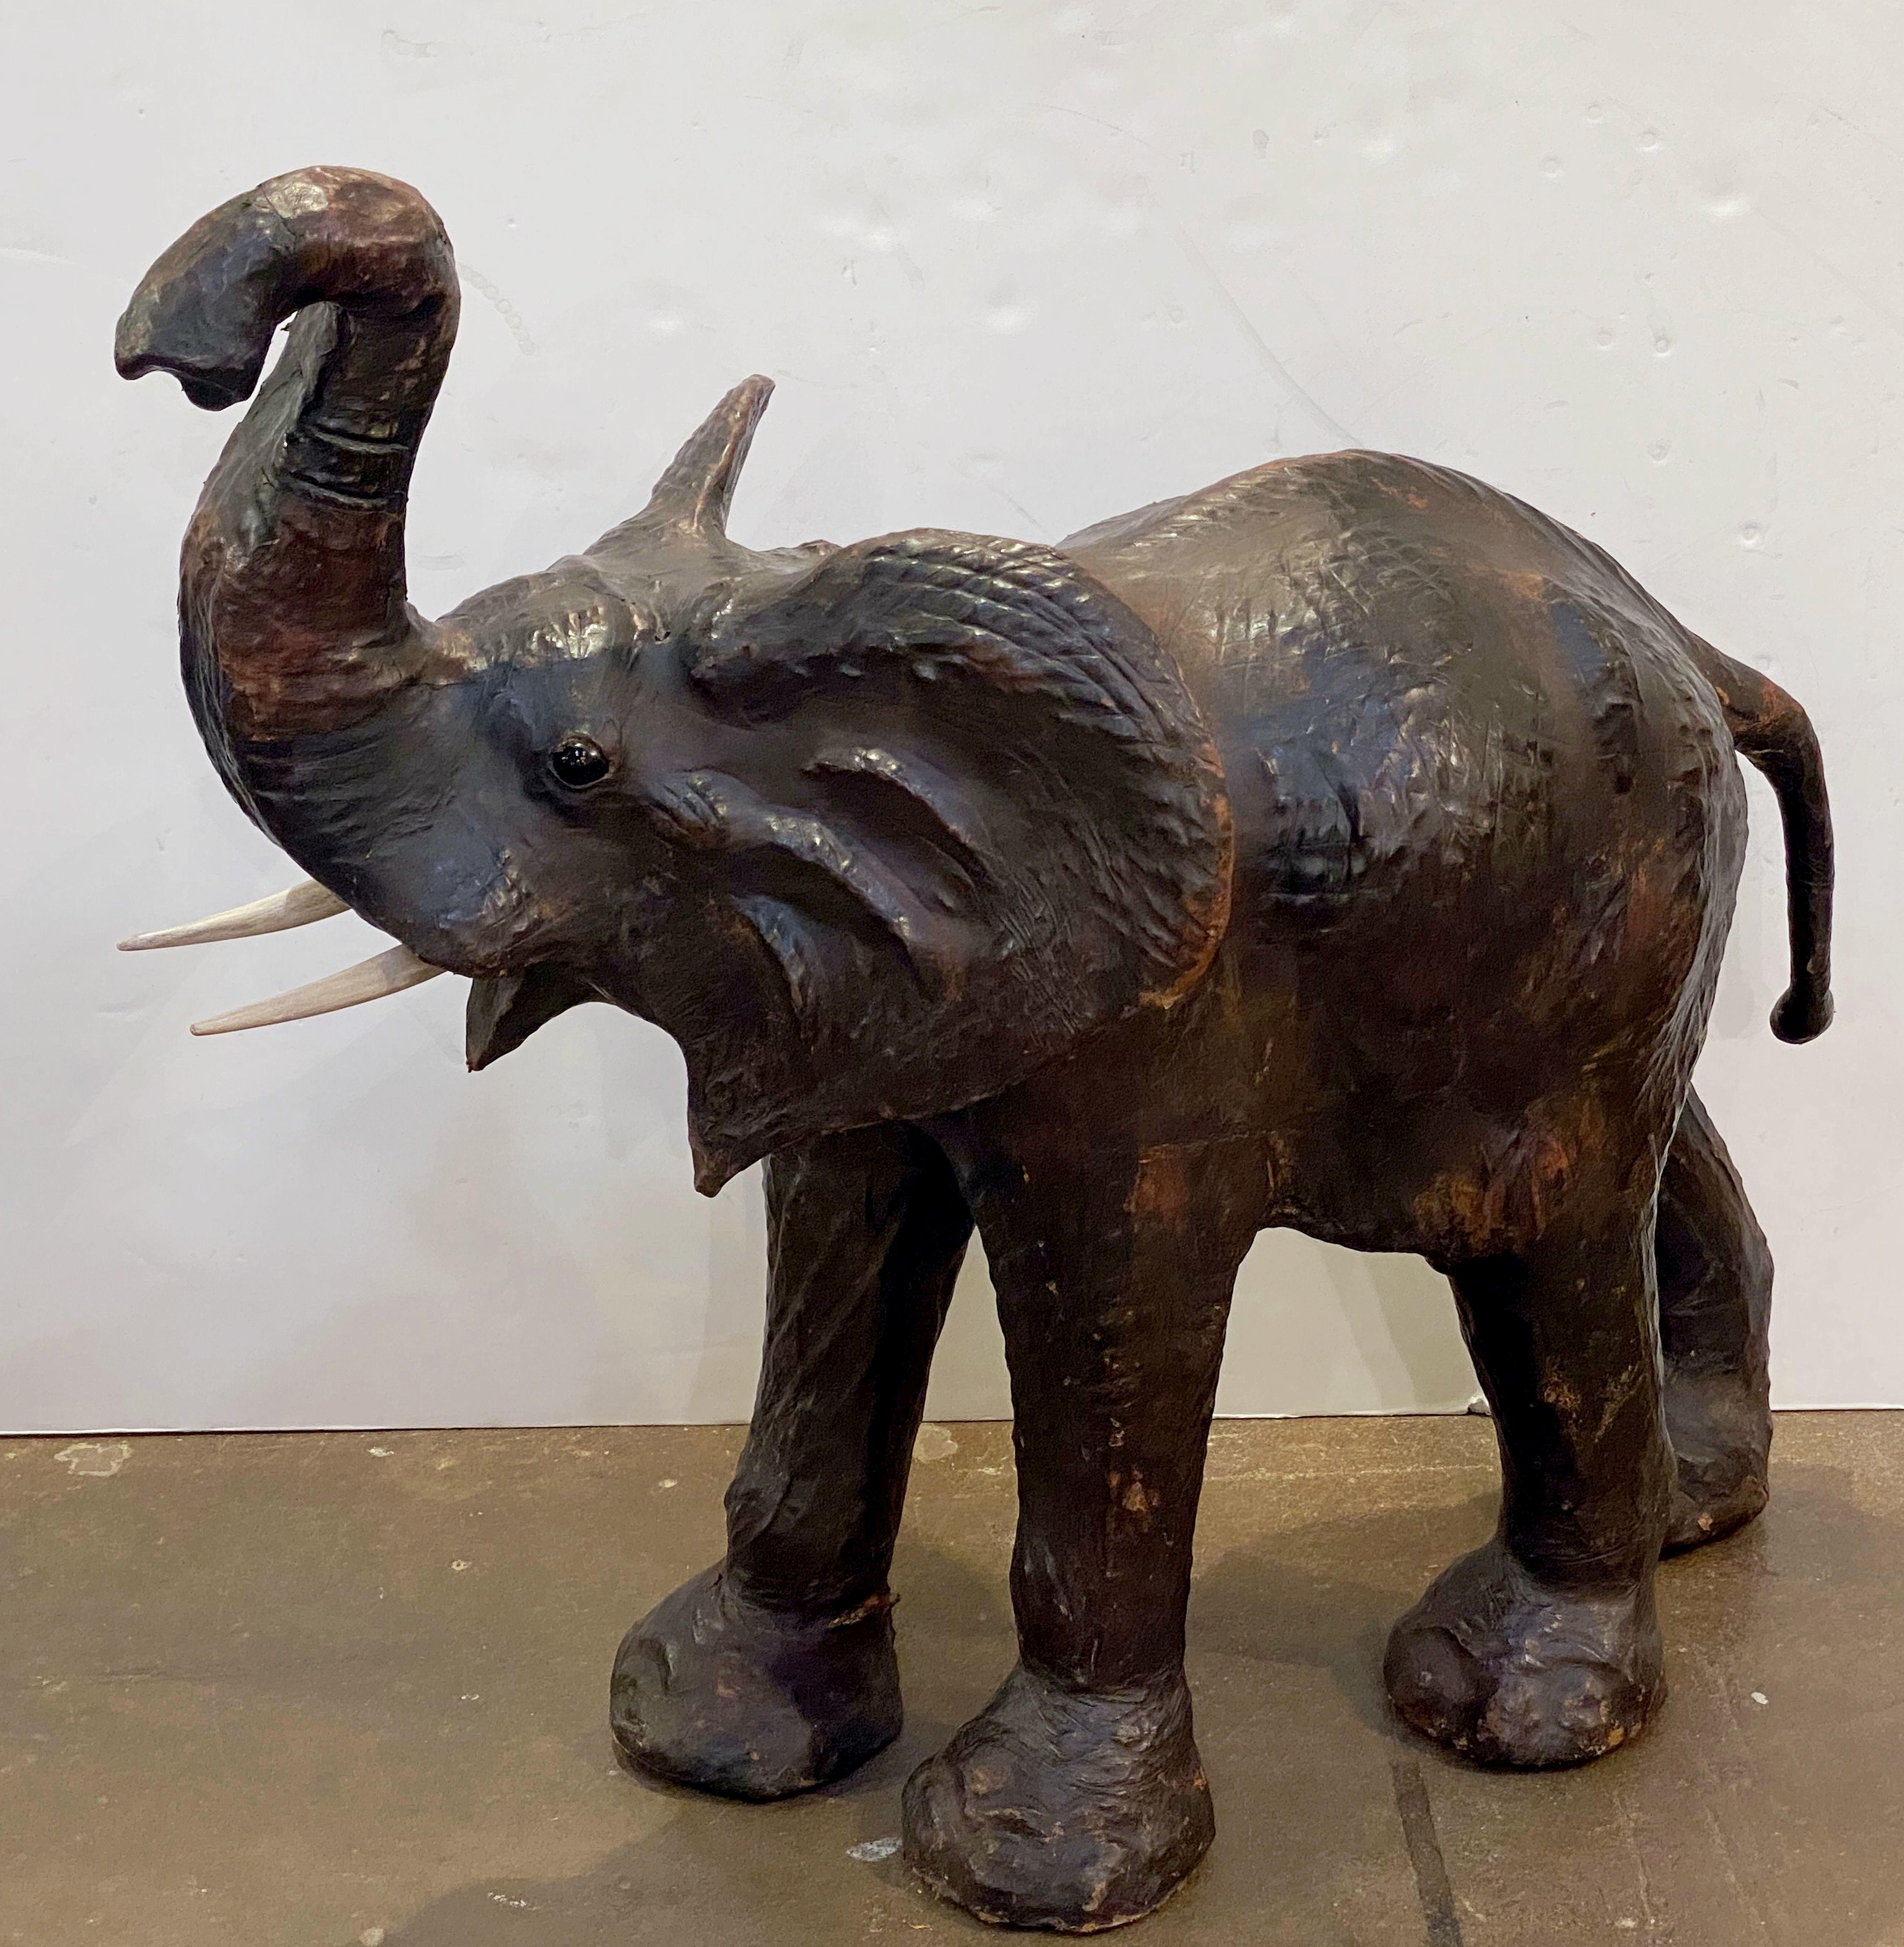 A fine large English model of a standing elephant from the early to mid-20th century, in cowhide leather with wooden tusks.

Dimensions are approximately: H 41 inches x W 47 inches x D 28 inches.